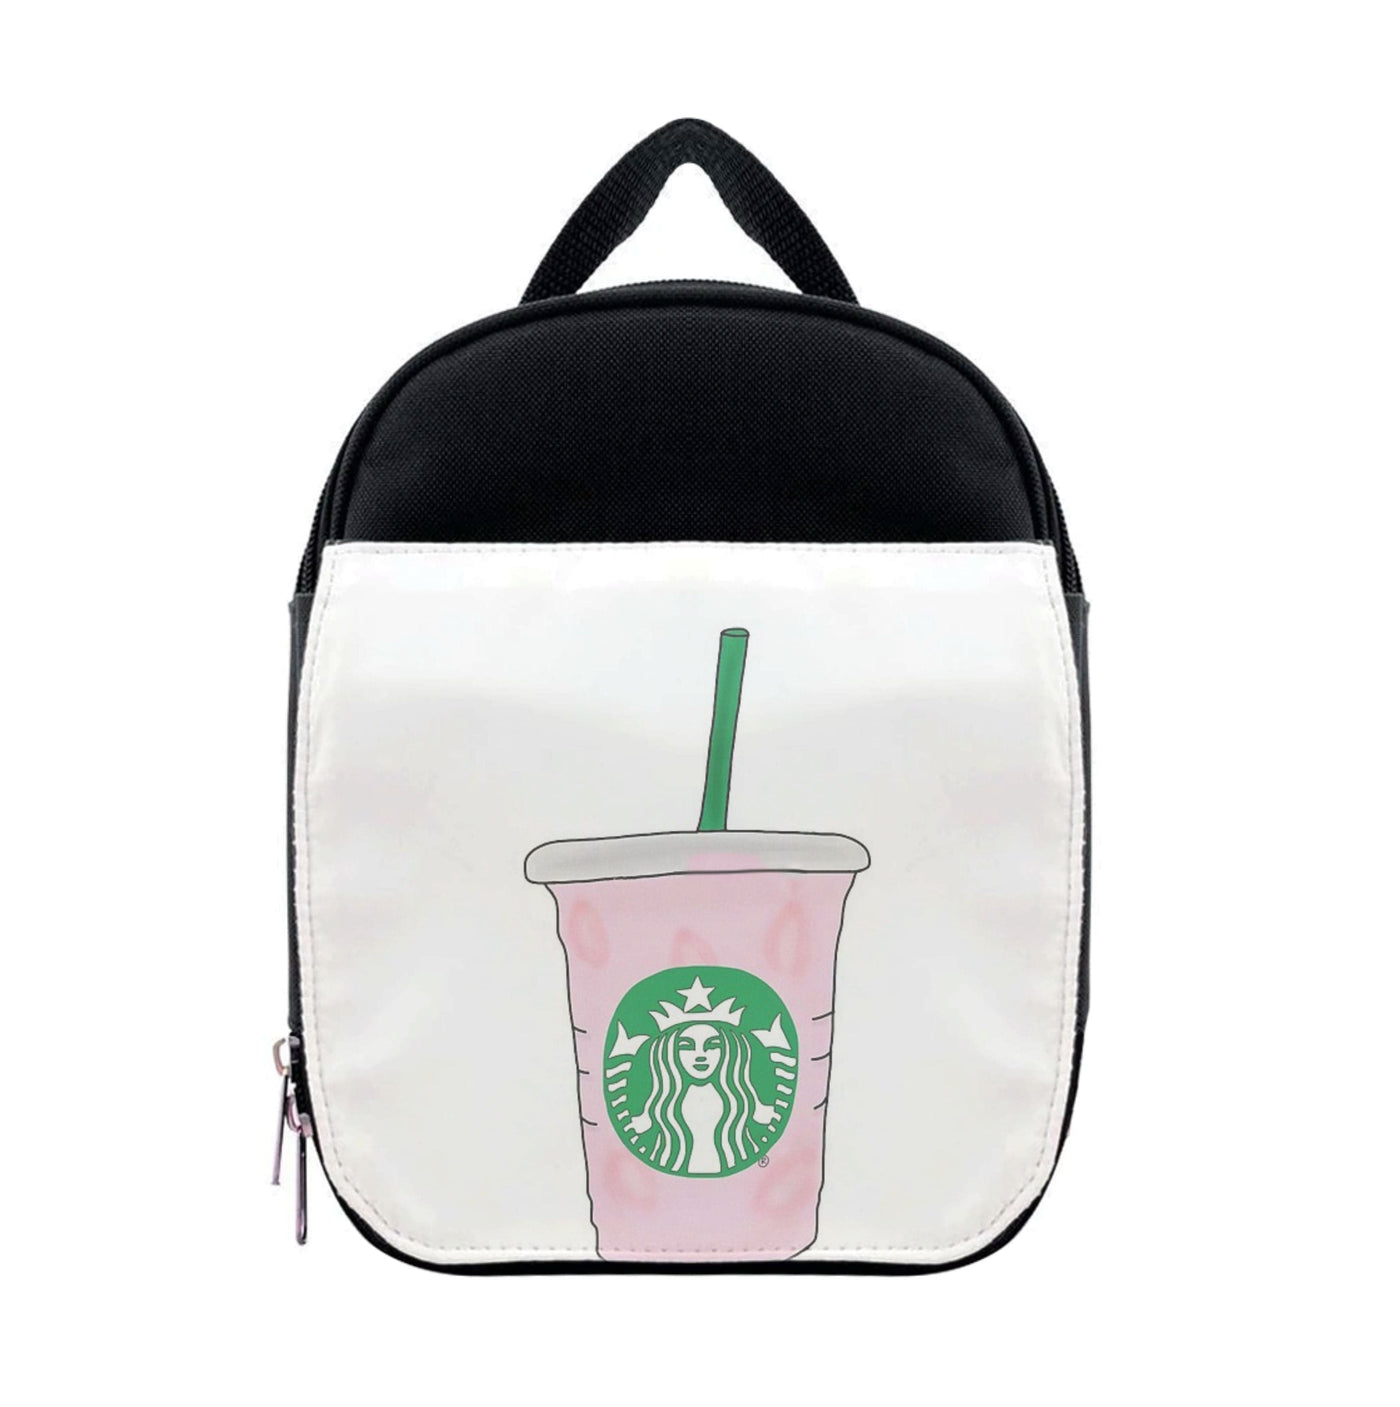 Starbuck Pinkity Drinkity - James Charles Lunchbox